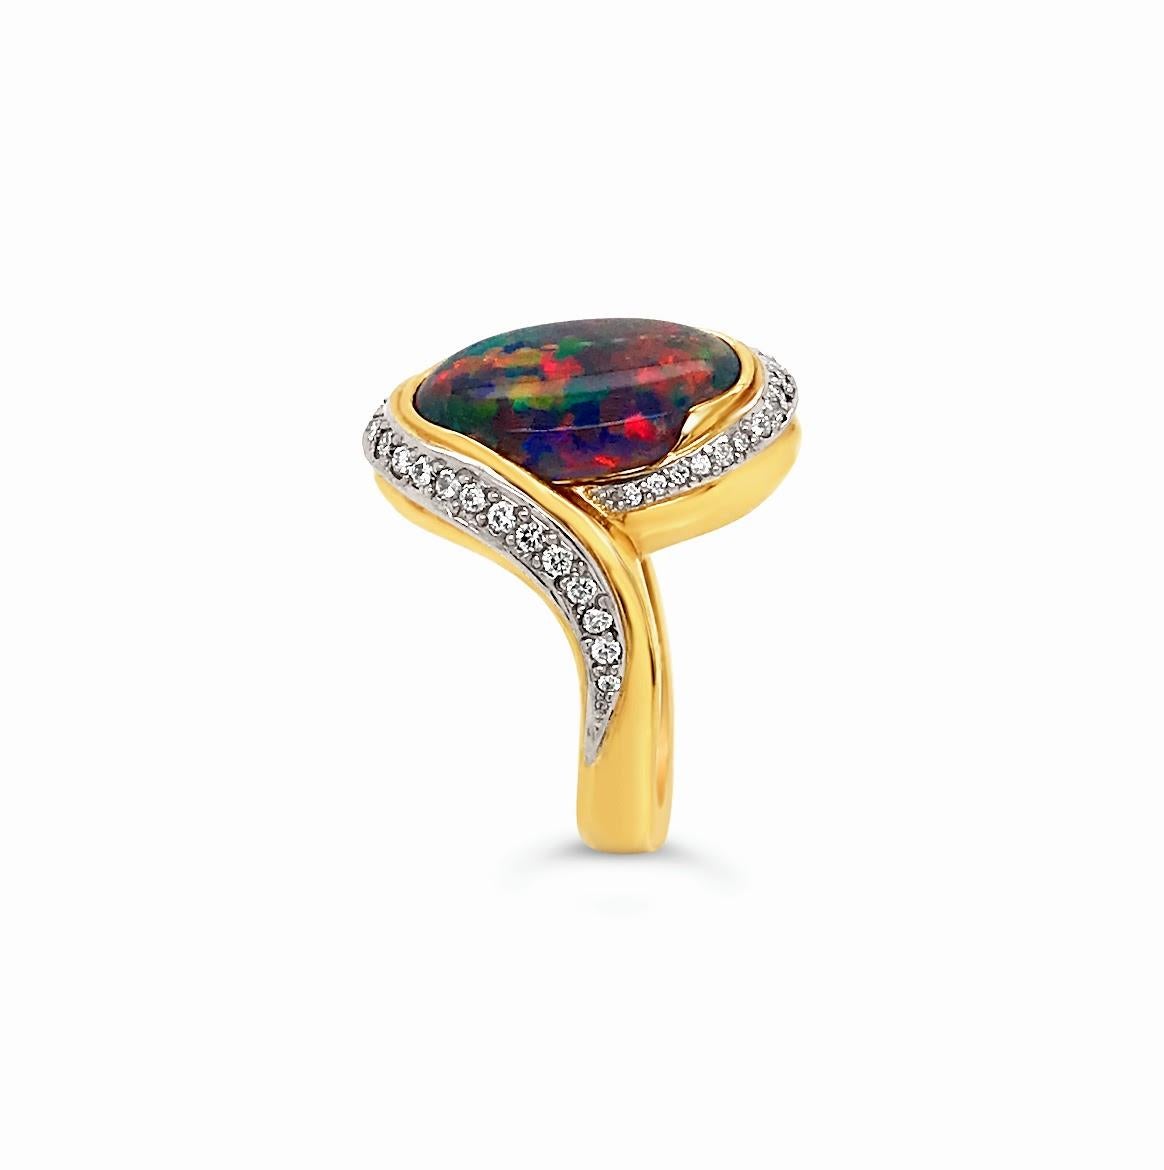 Cabochon Australian 5.48ct Black Opal and Diamond Cocktail Ring in 18K Gold